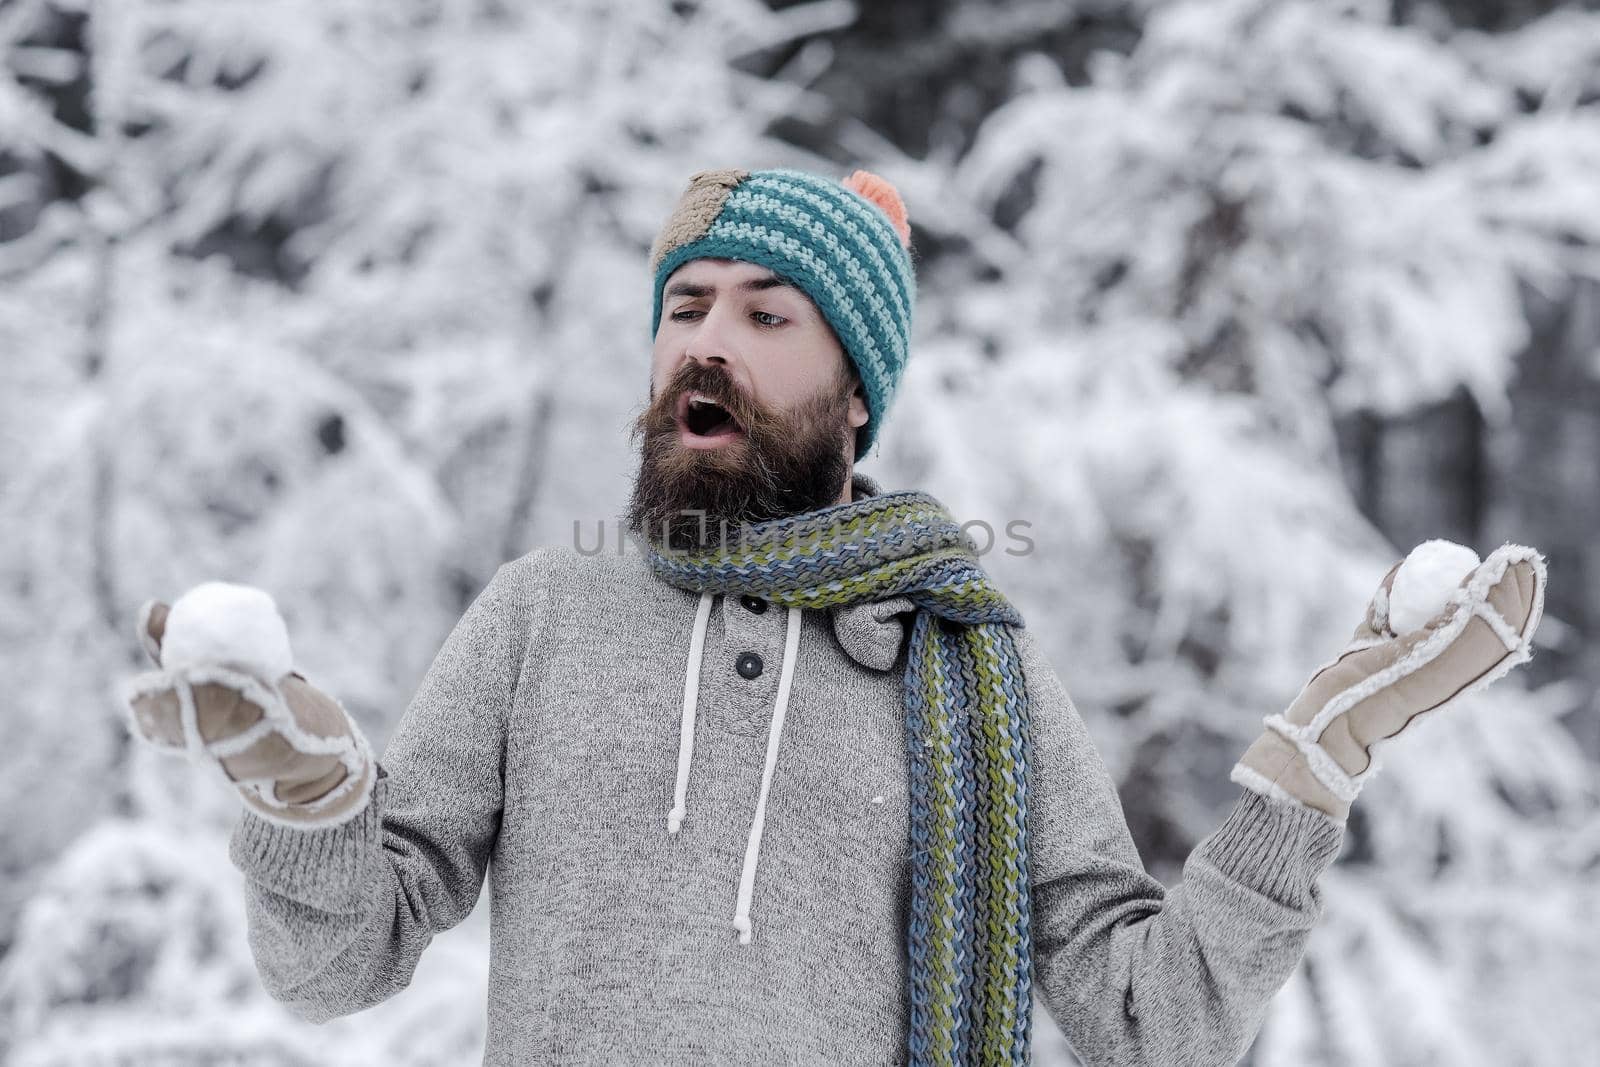 Bearded man with snowballs in snowy forest. Skincare, beard care in winter. Hipster in jacket, hat, scarf, beard warm in winter. Snow fight, winter rest.